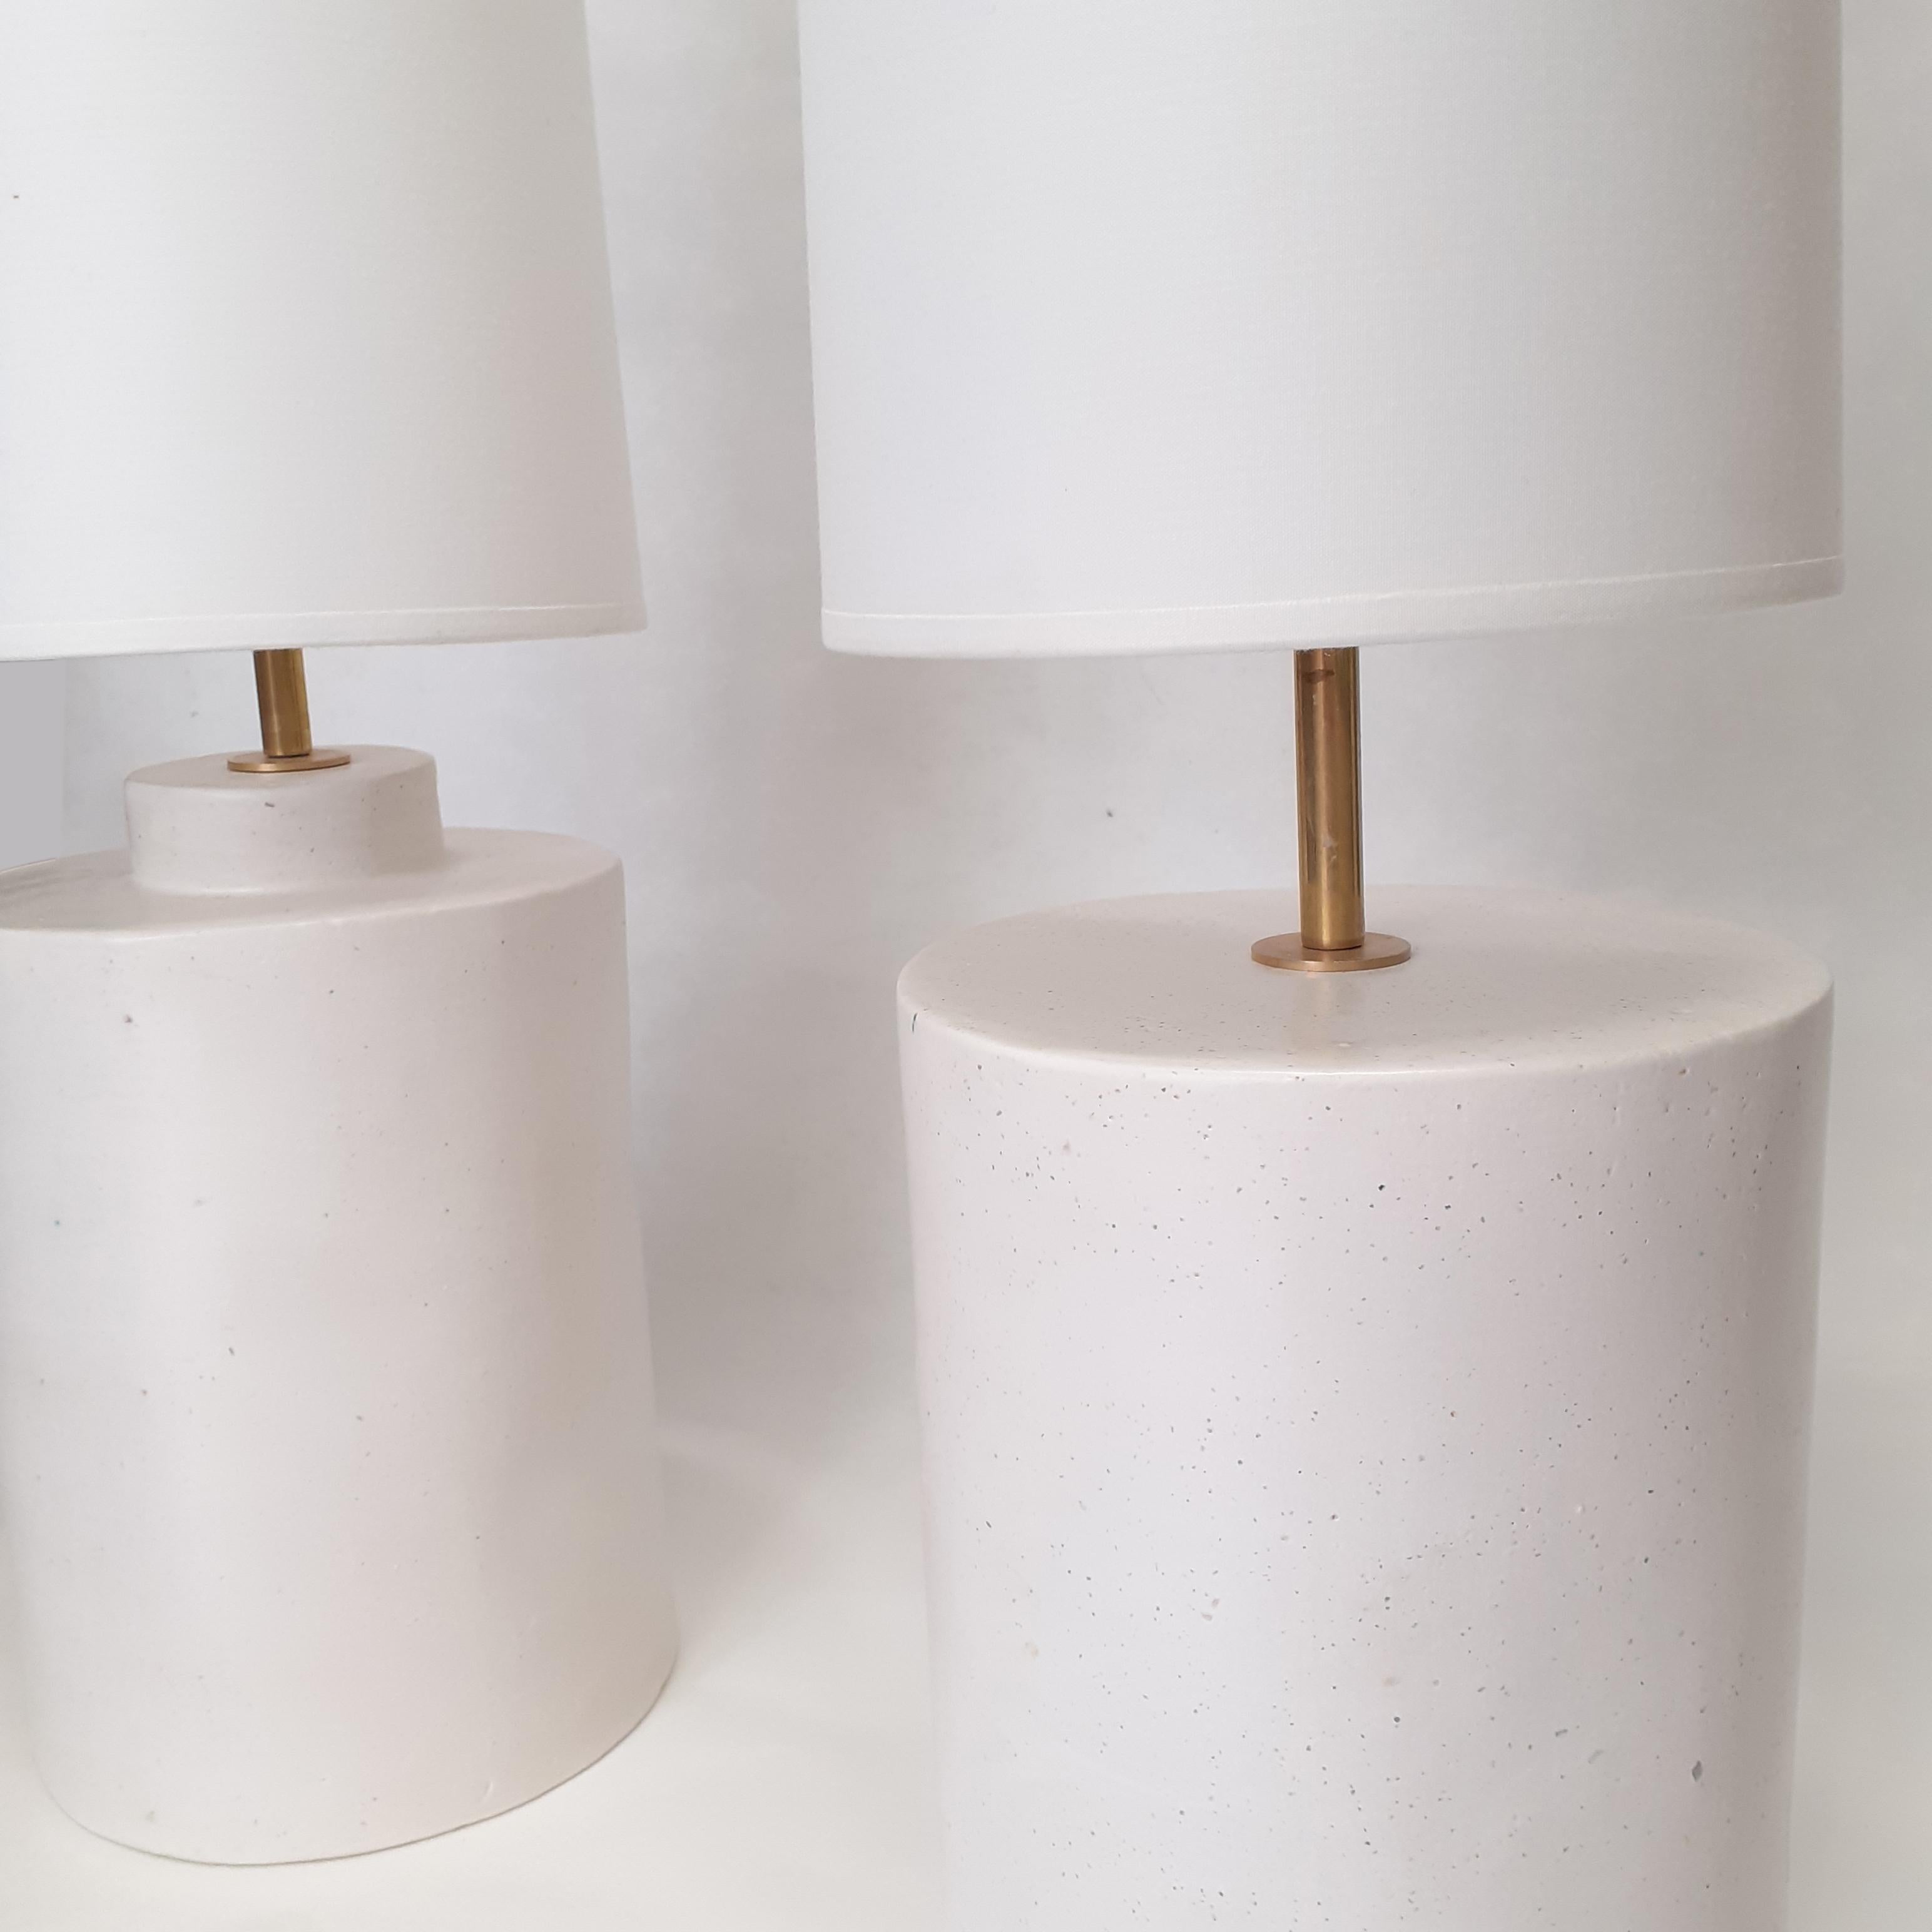 Very chic pair of ceramic lamps.
Handmade by Elsa Foulon Studio in her workshop at Paris.
Satin white enameled ceramic, brass structure and cotton shades.
  